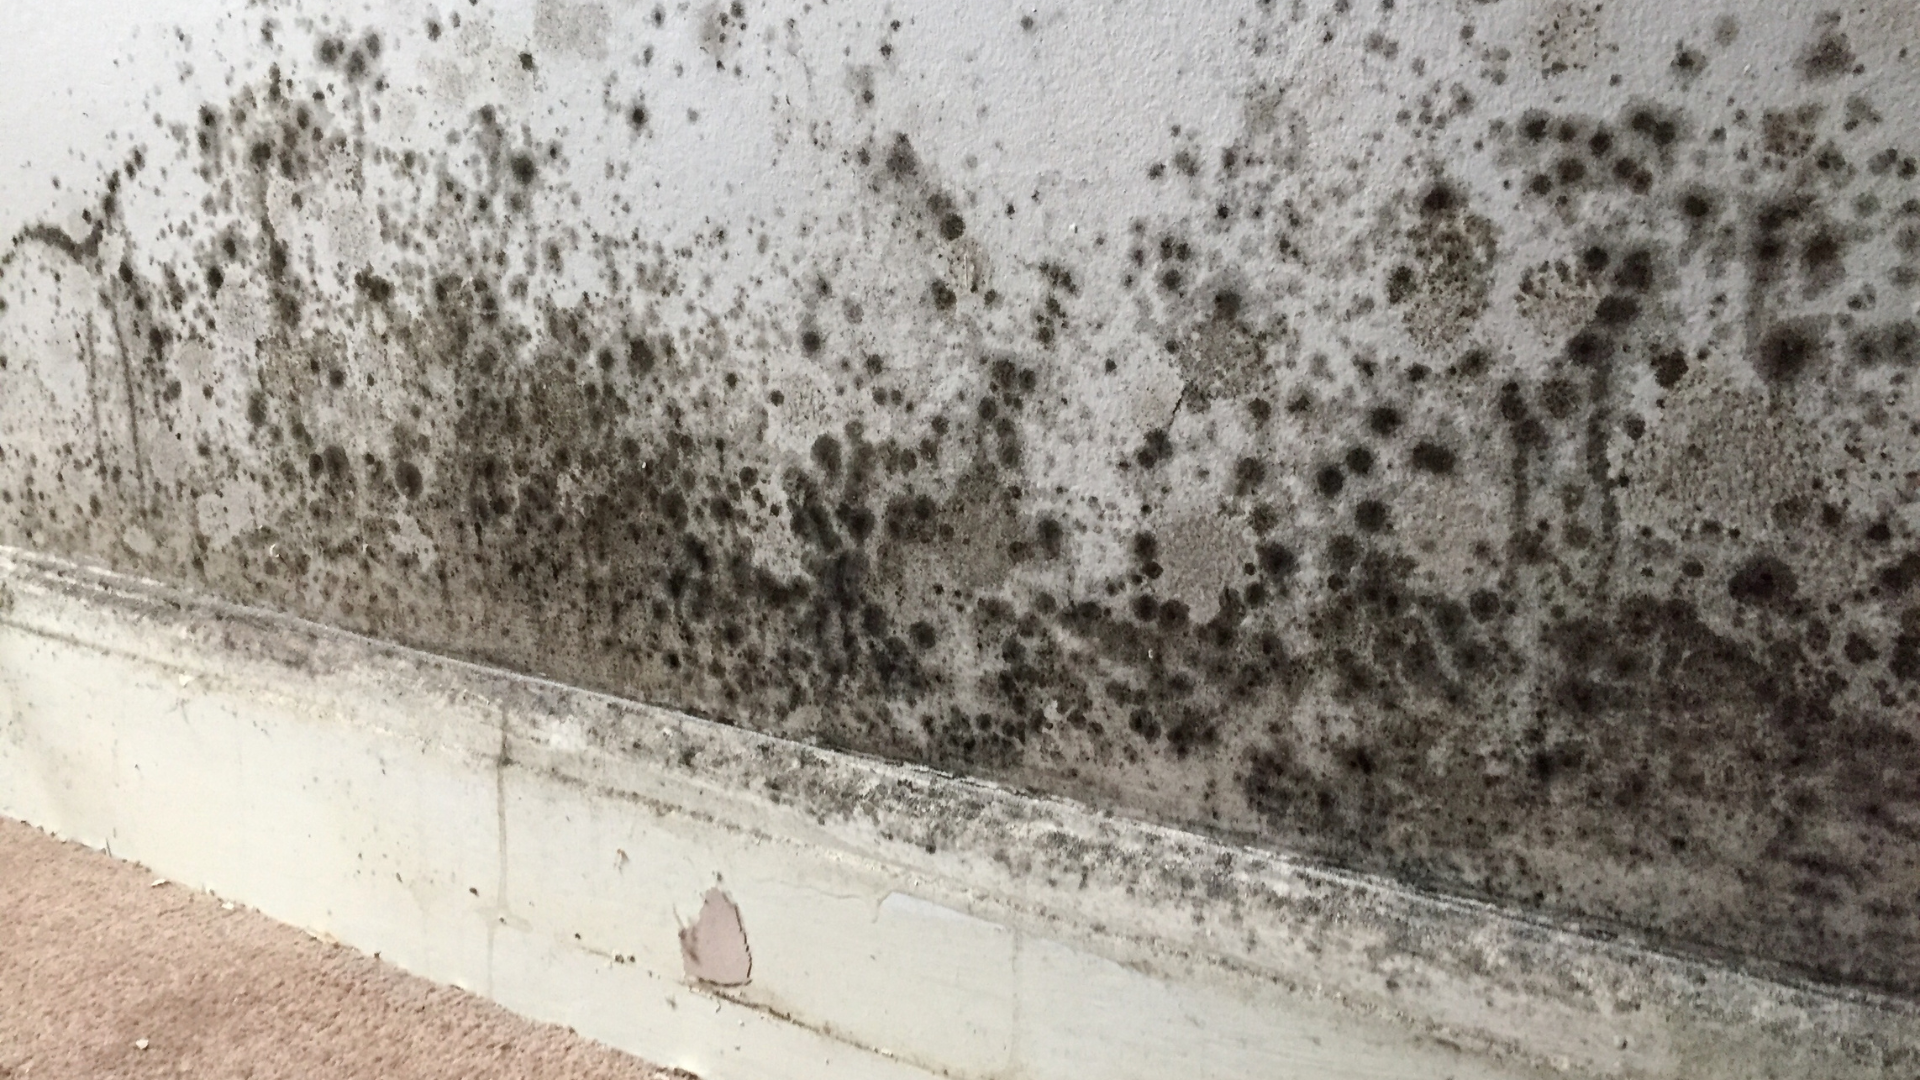 England: Vulnerable child lived in damp and mould for three years